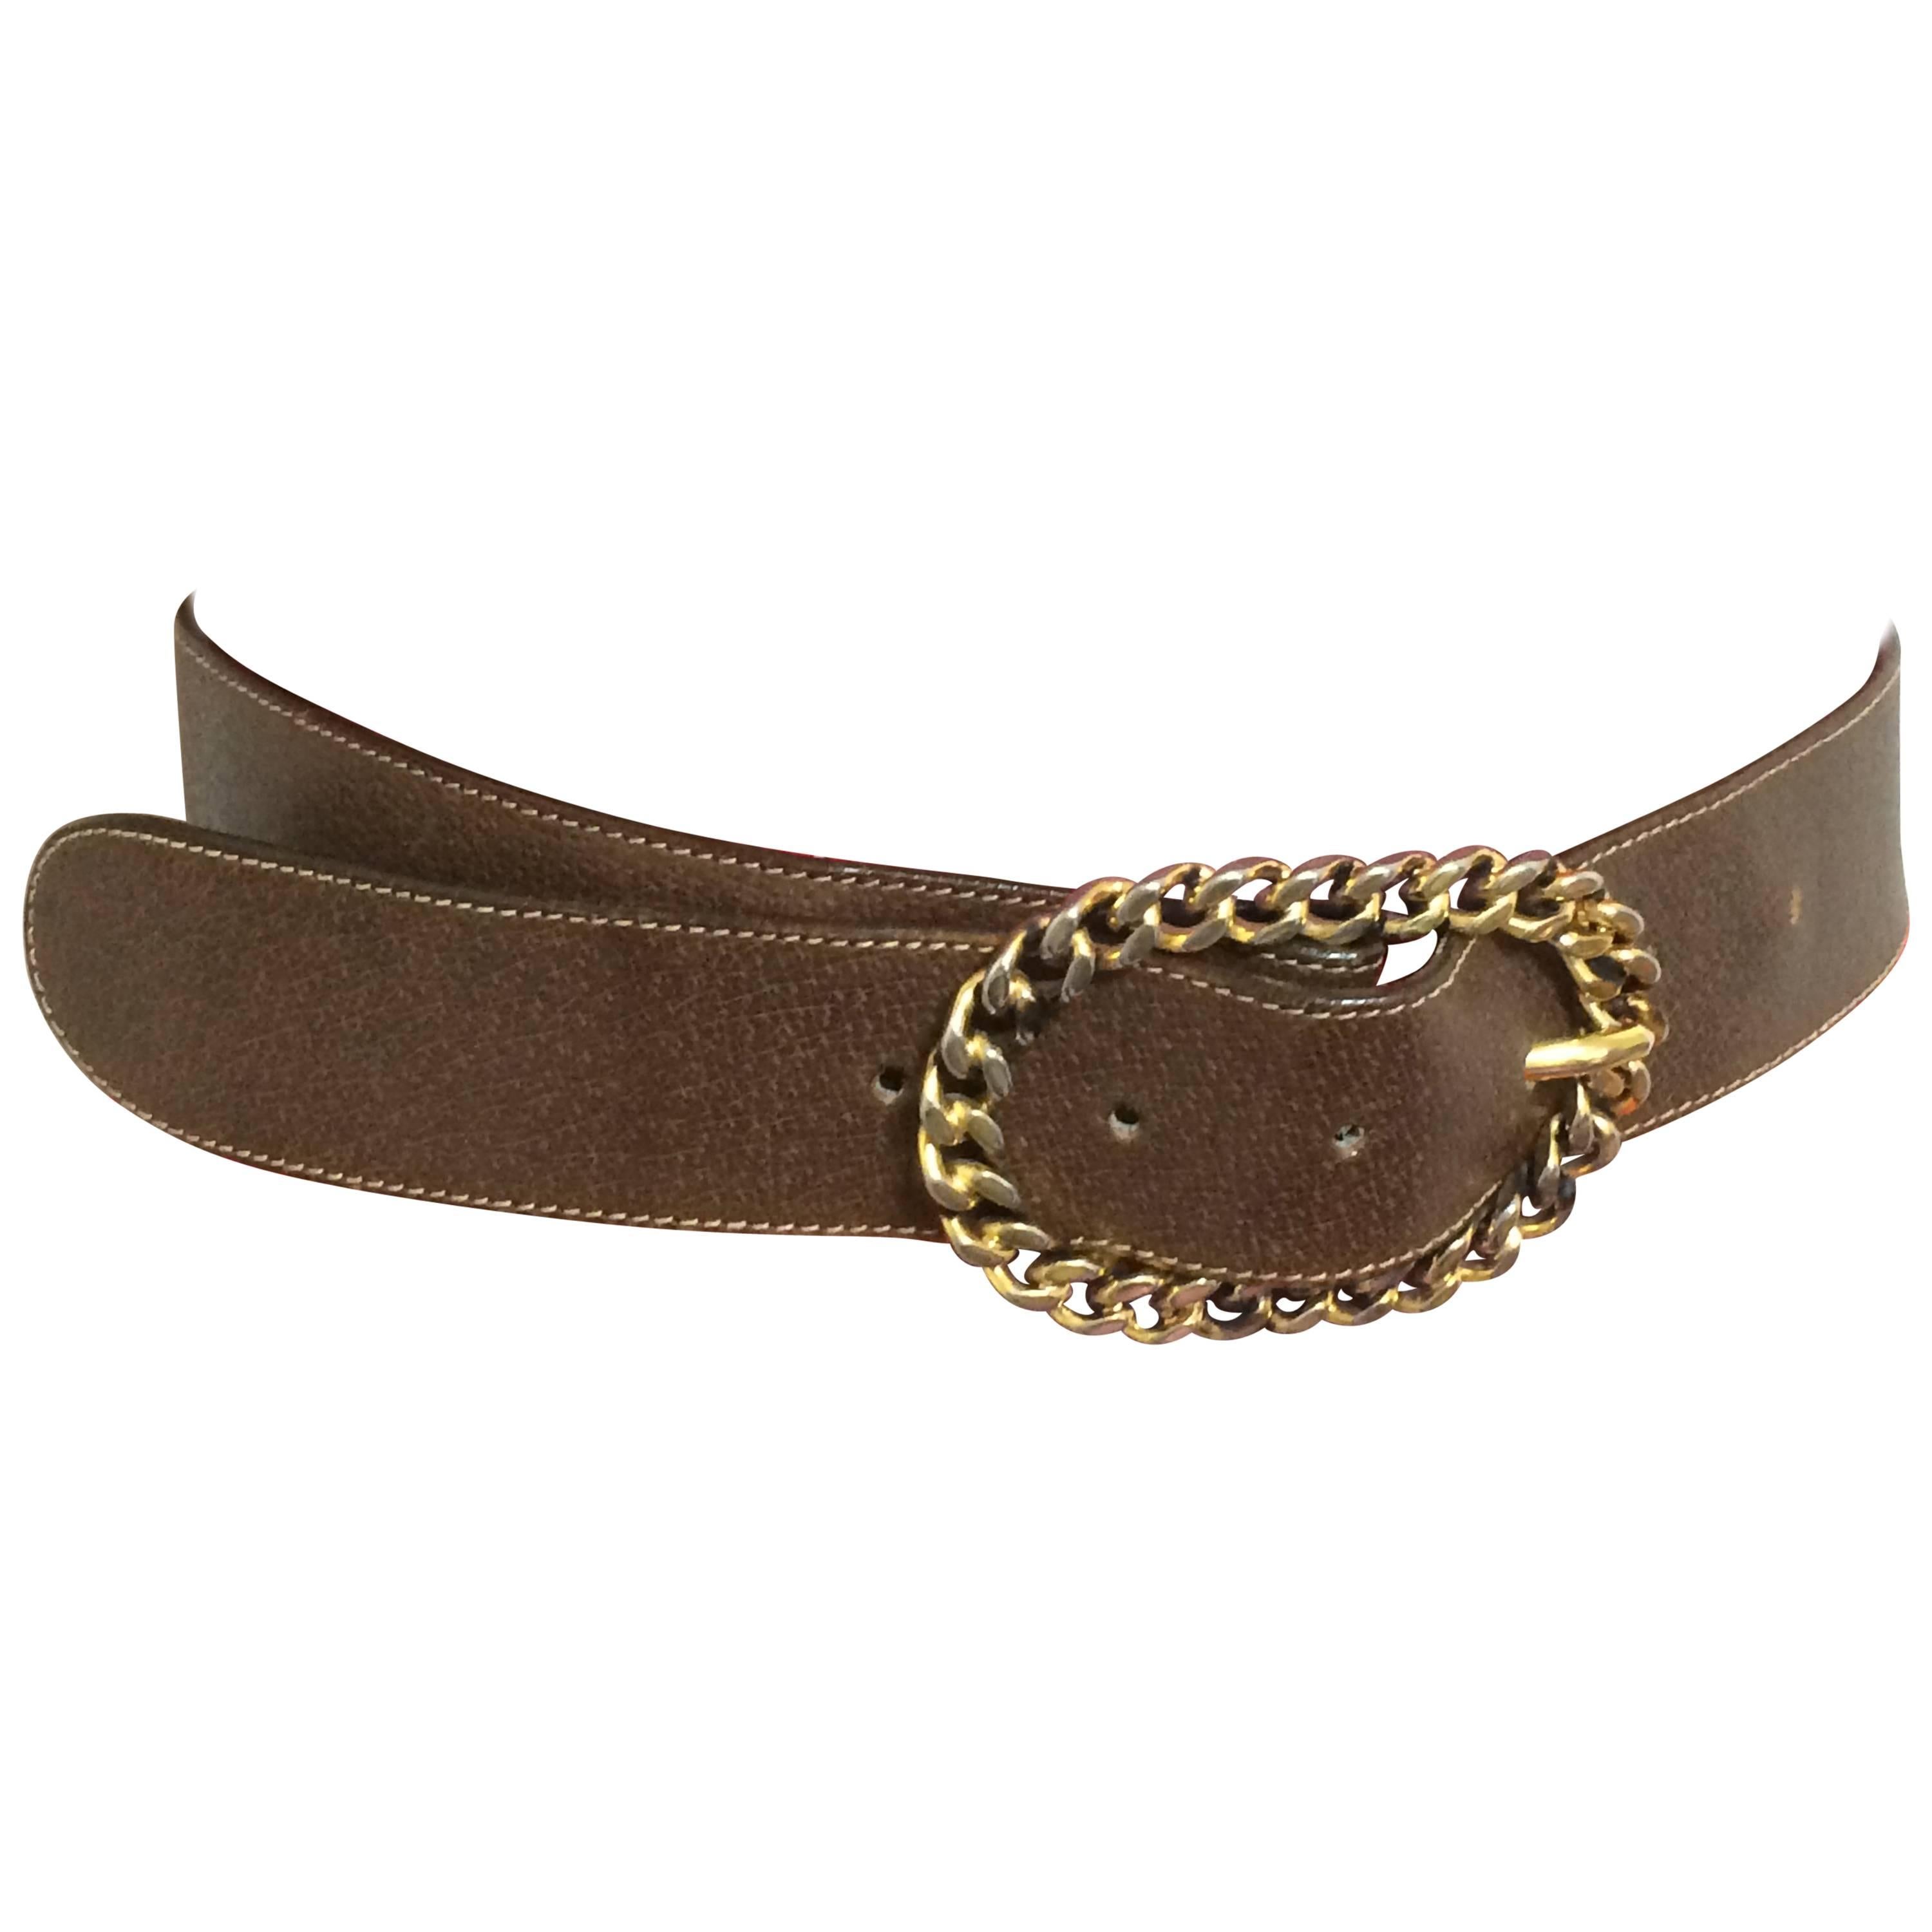 Vintage Gucci dark brown leather belt with detachable golden chain buckle.  For Sale